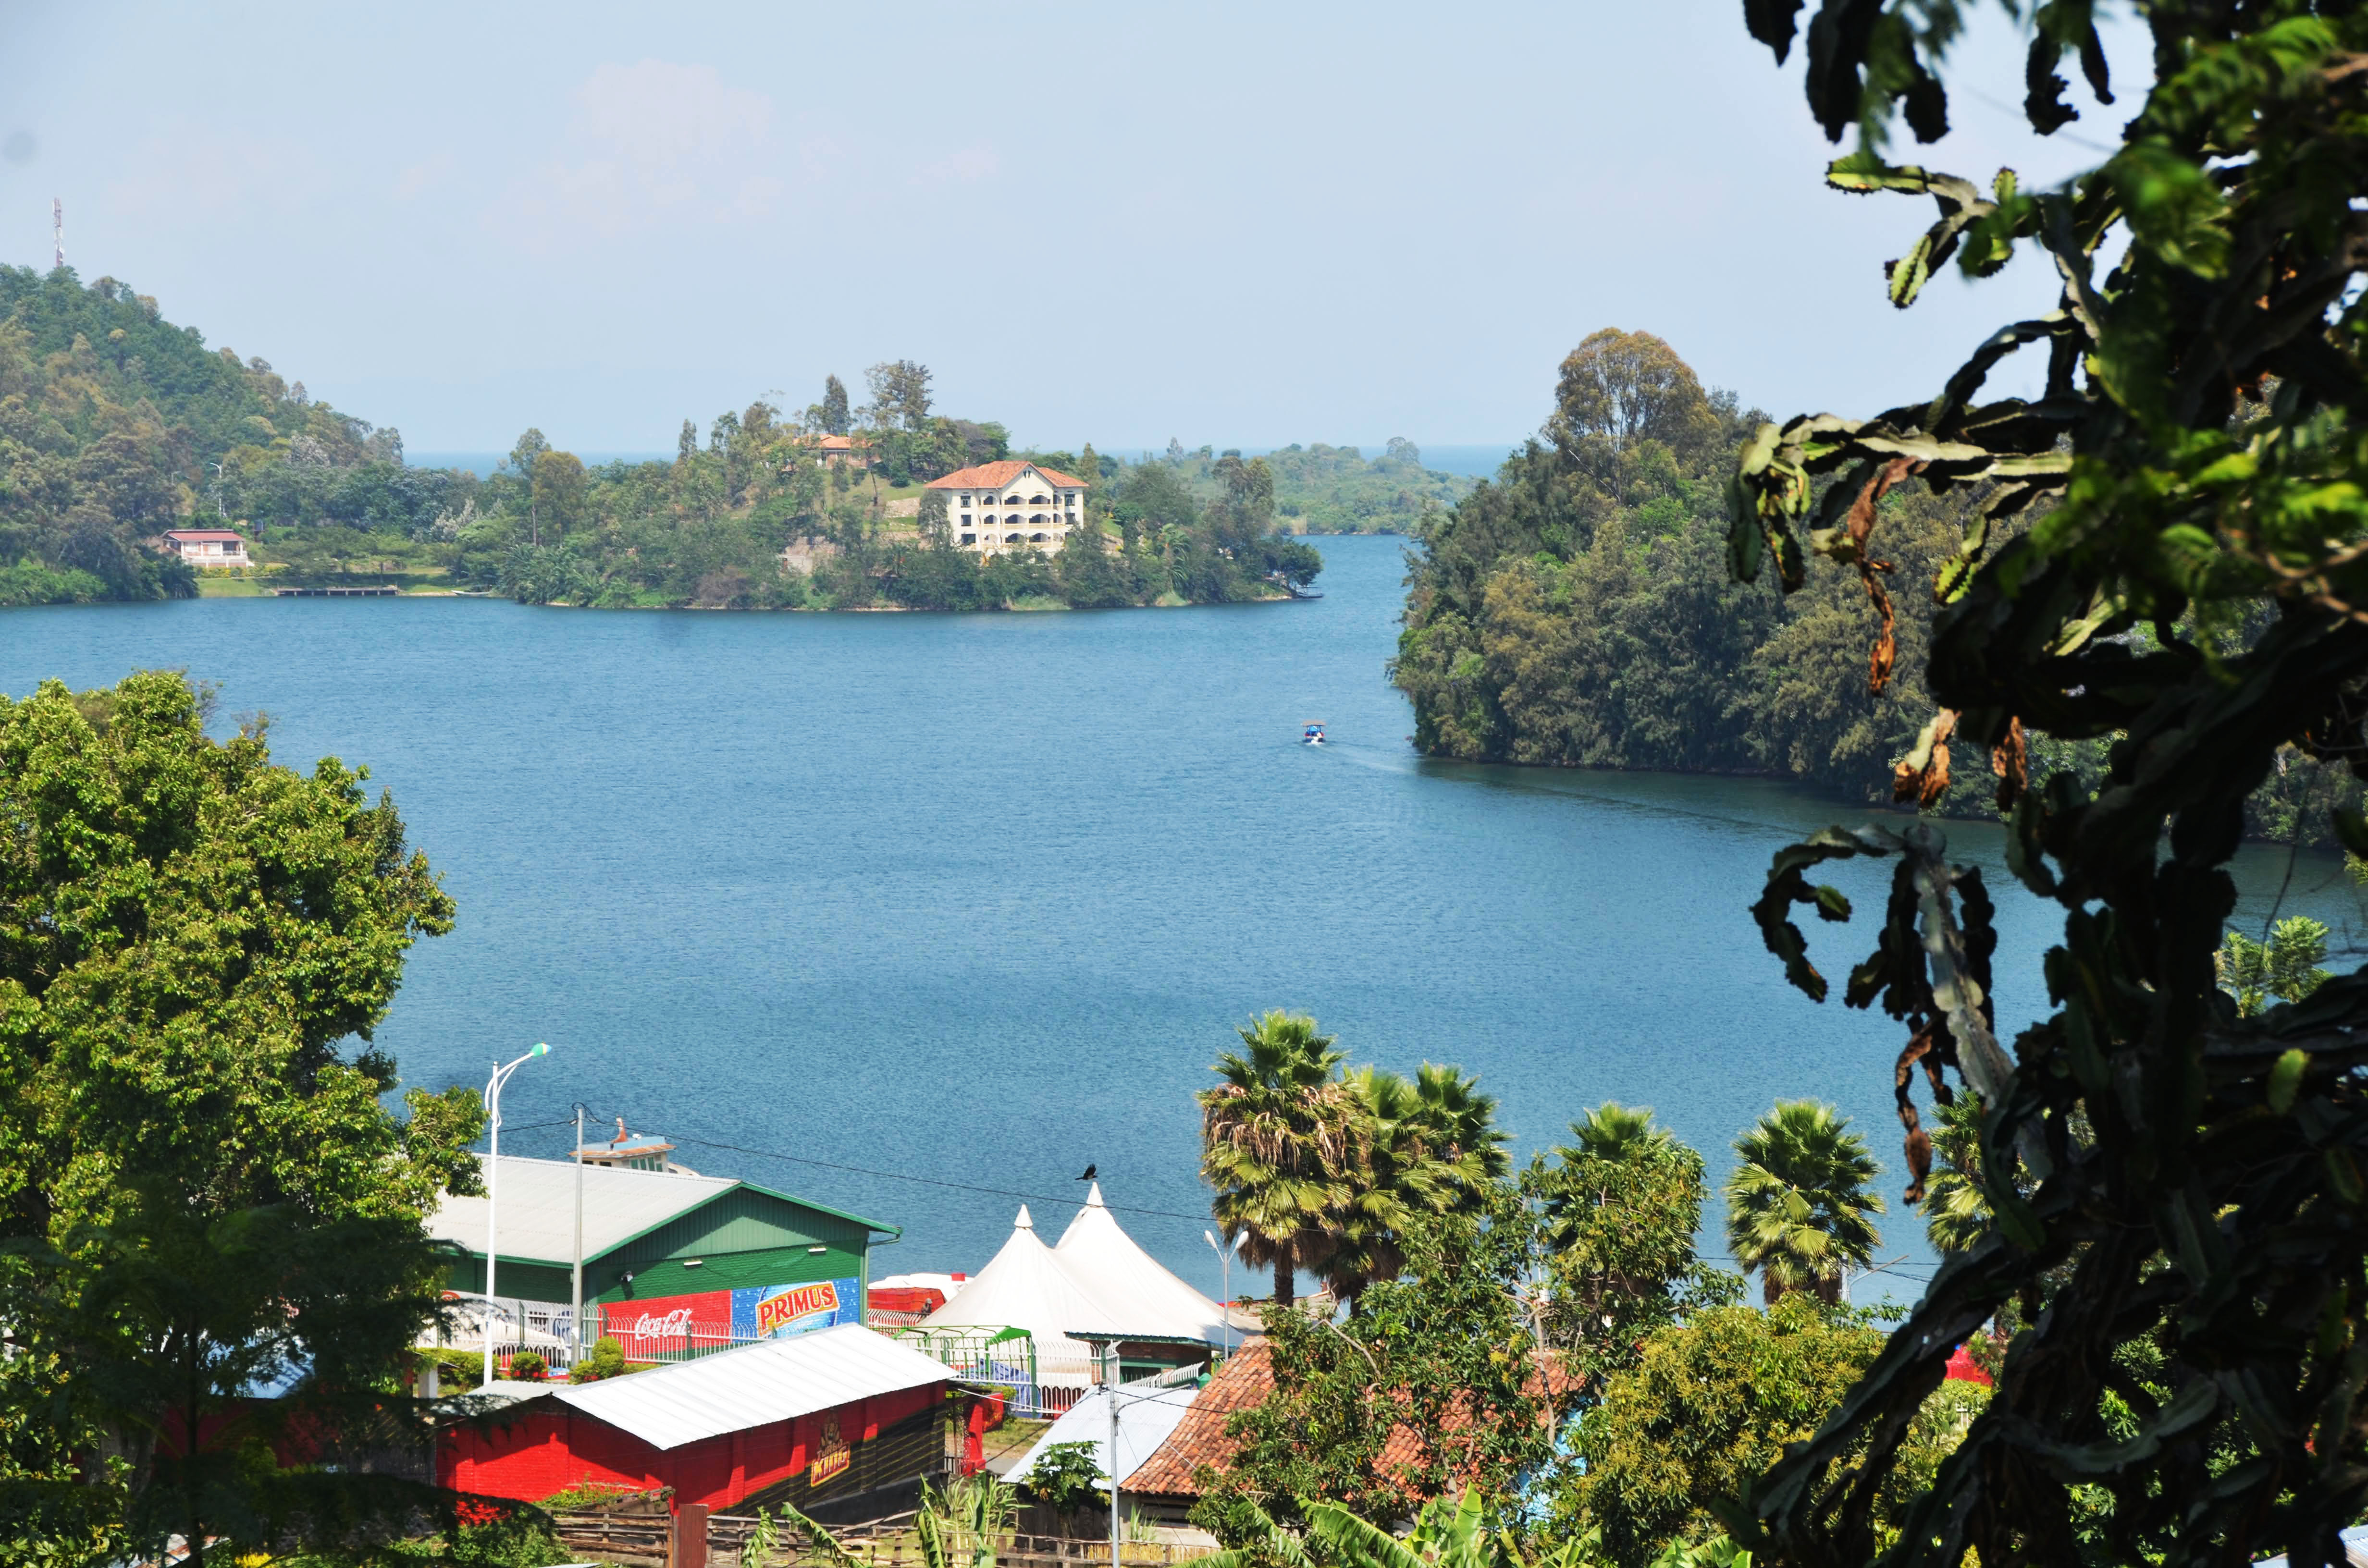 A landscape view of Lake Kivu and some infrastructure on the shores of the lake in Karongi District. Conservation experts have proposed a 'community participatory approach' as a sustainable model that could end the rising encroachment of Rwandau2019s major lakes and rivers buffer zones. 